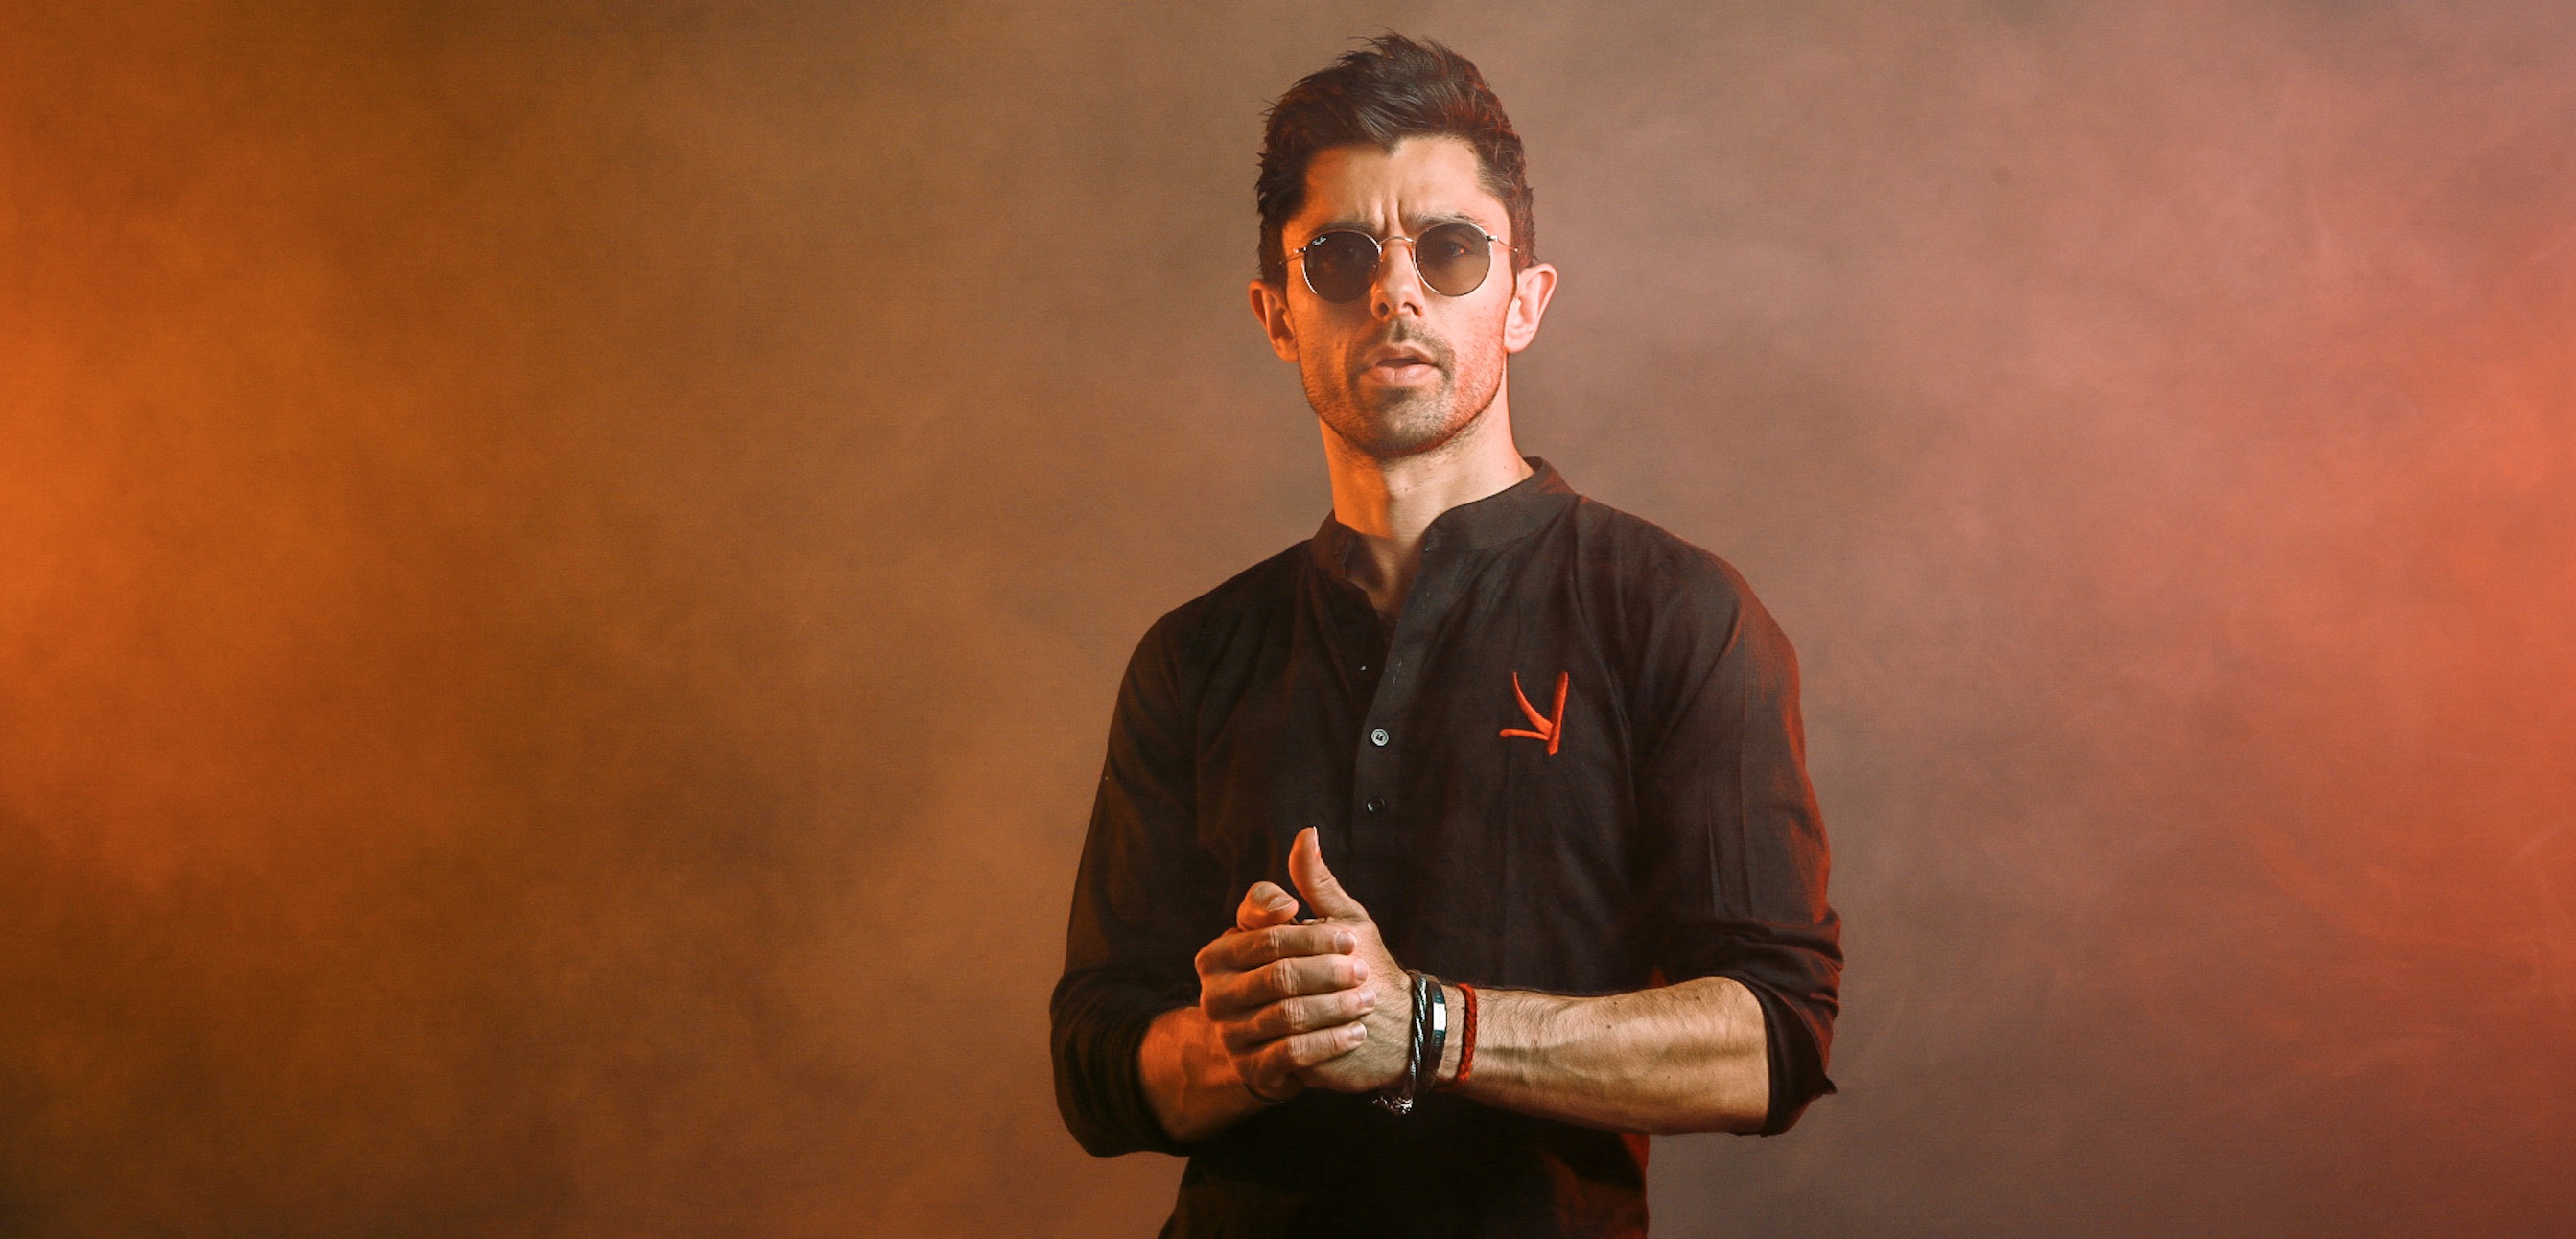 Listen to KSHMR's guest mix at Spinnin' Sessions